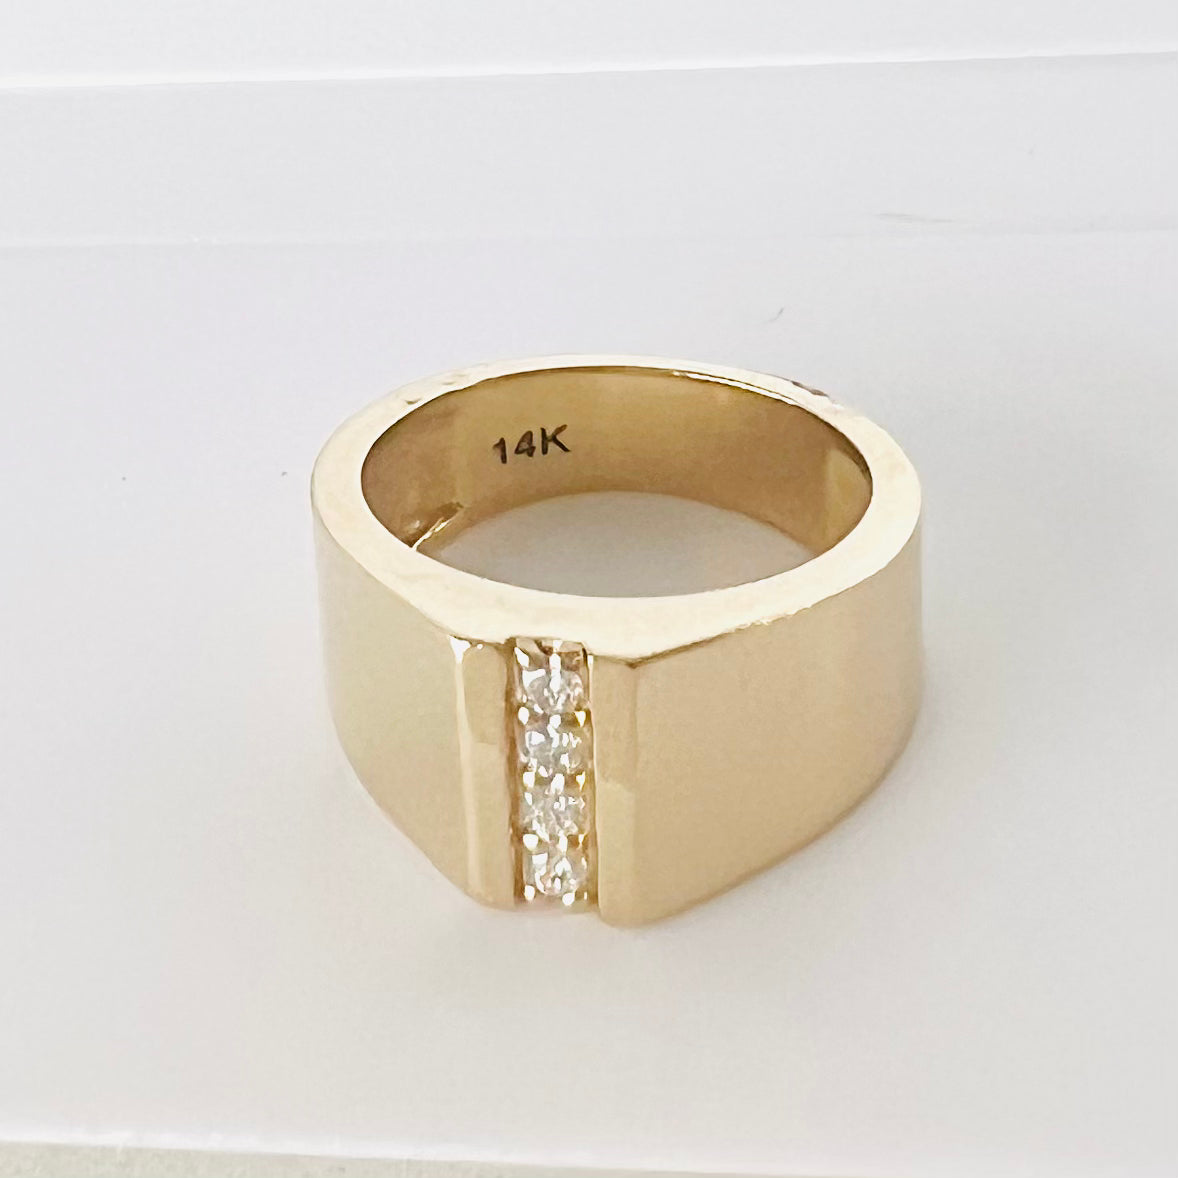 14k gold thick band ring with vertical row of diamonds